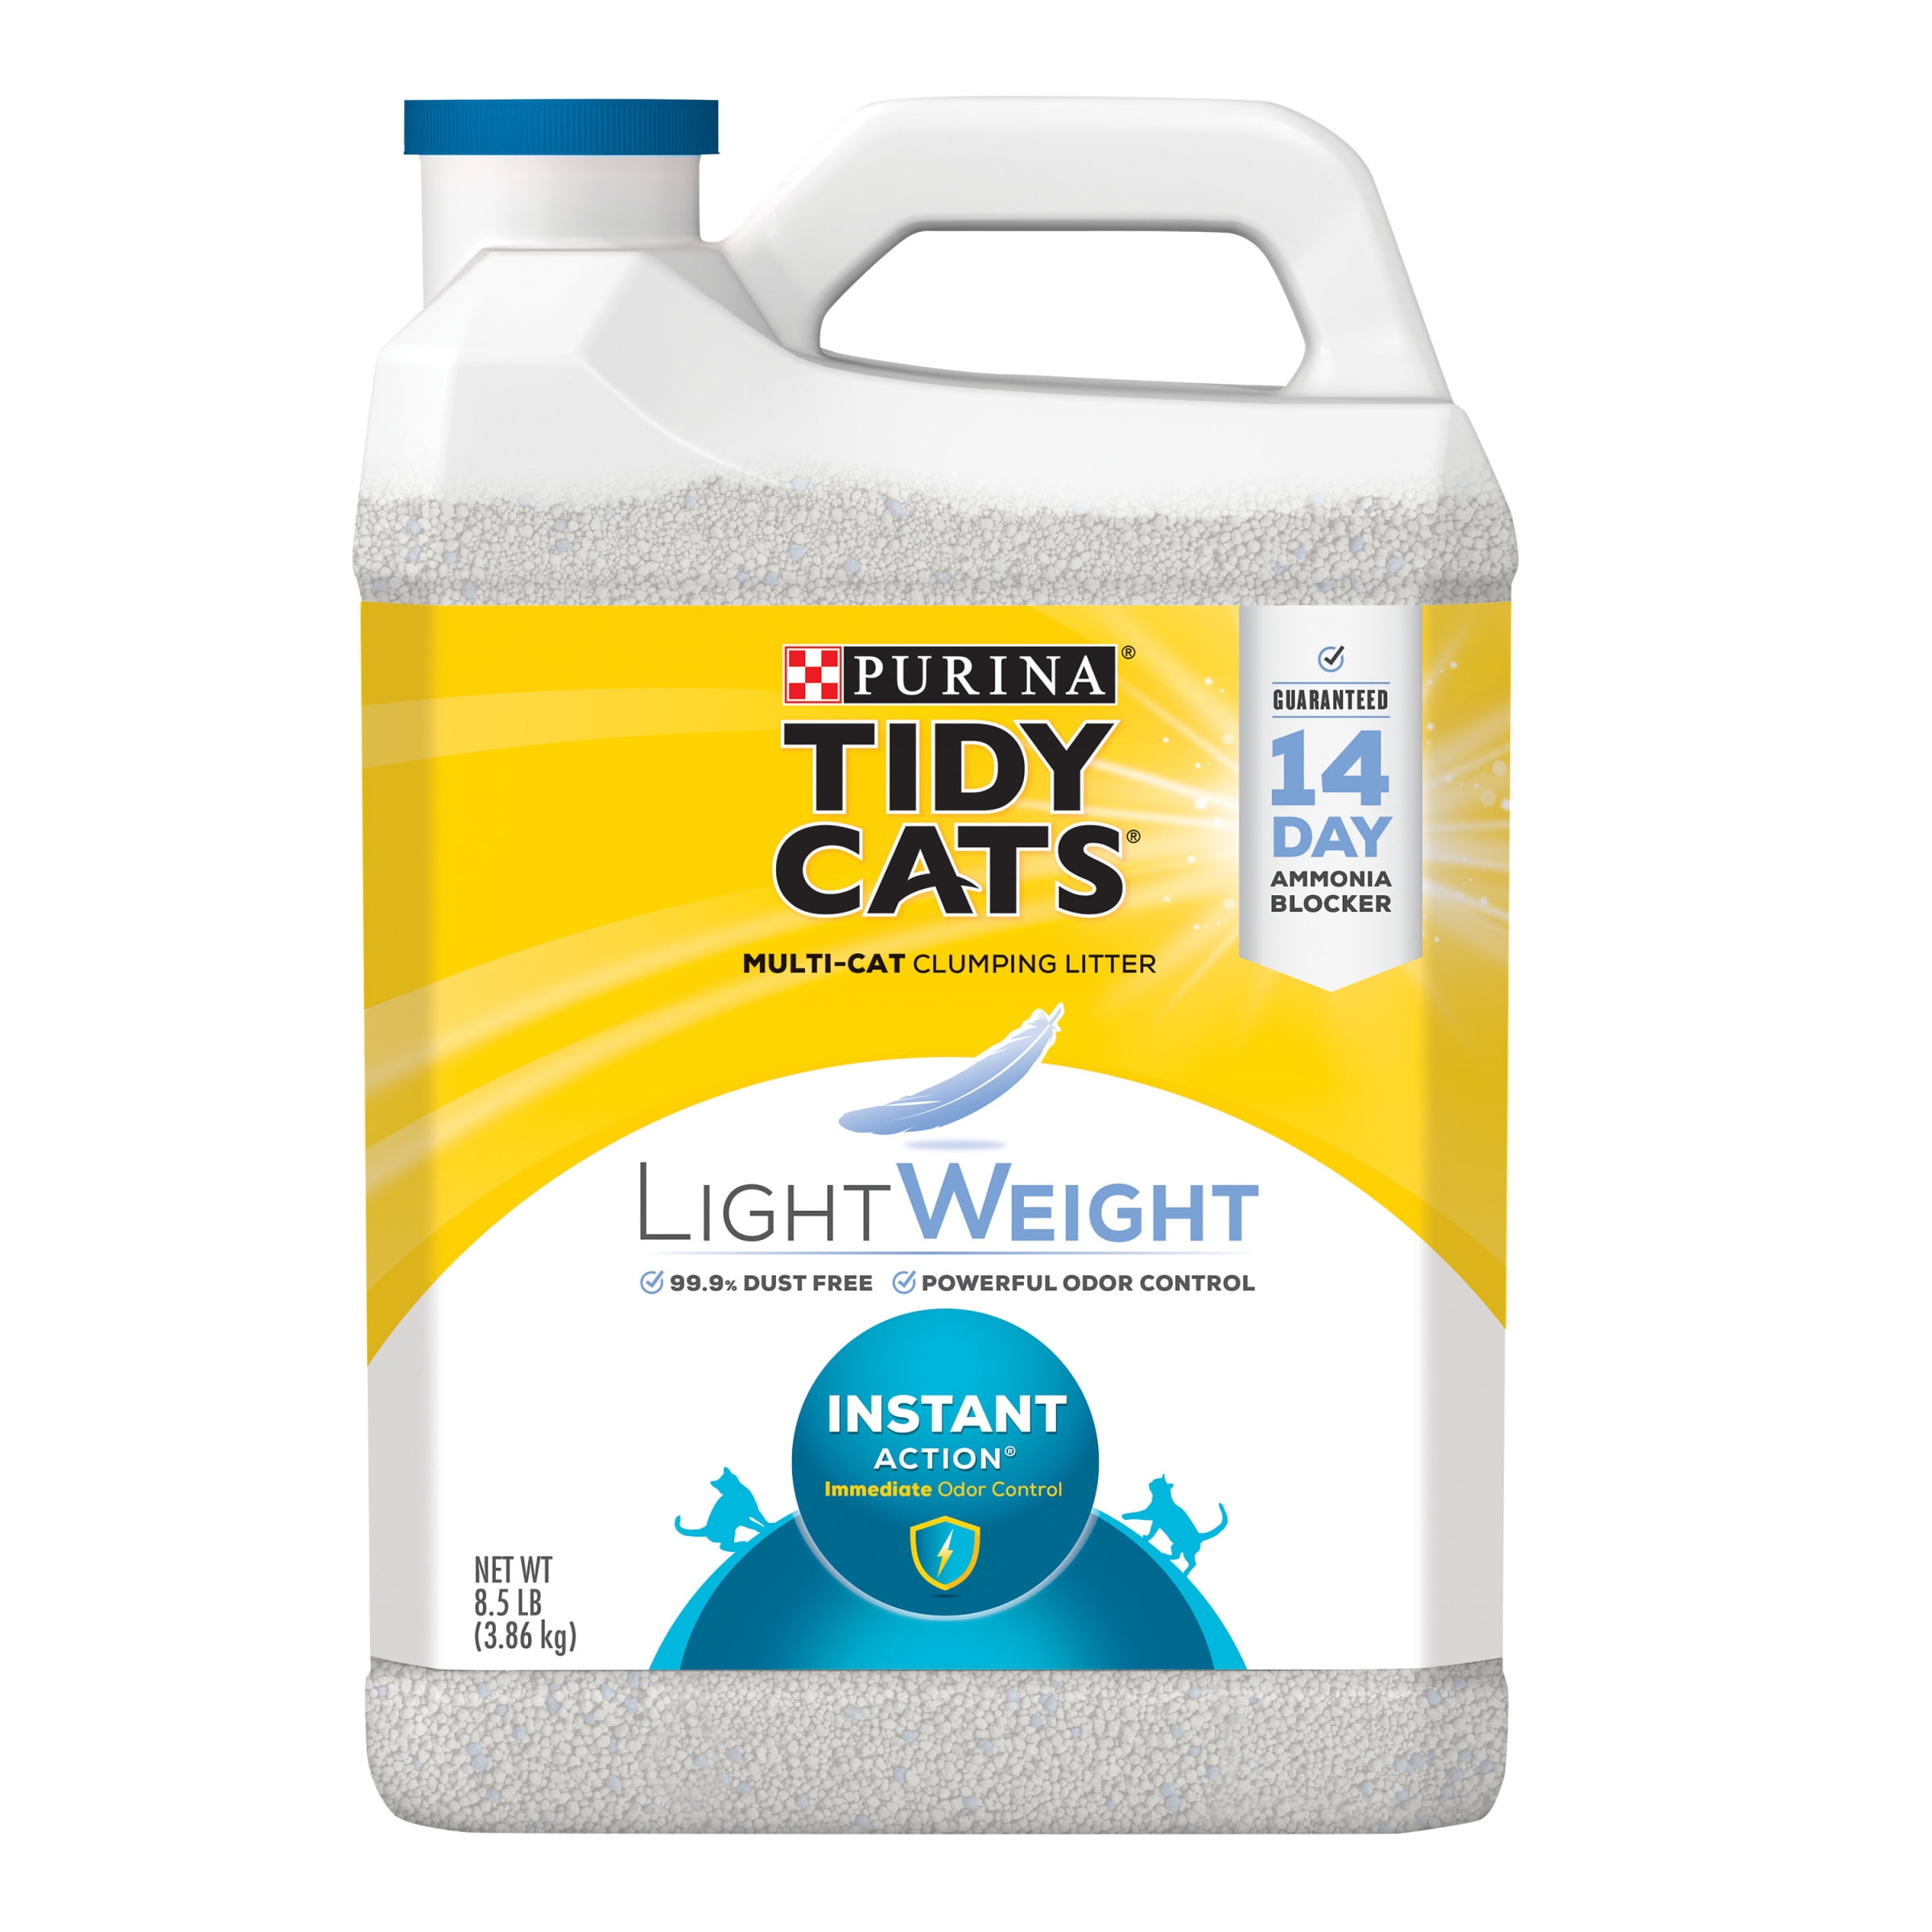 Purina Tidy Cats Non-Clumping Cat Litter Instant Action Households Formula 30 Lb 